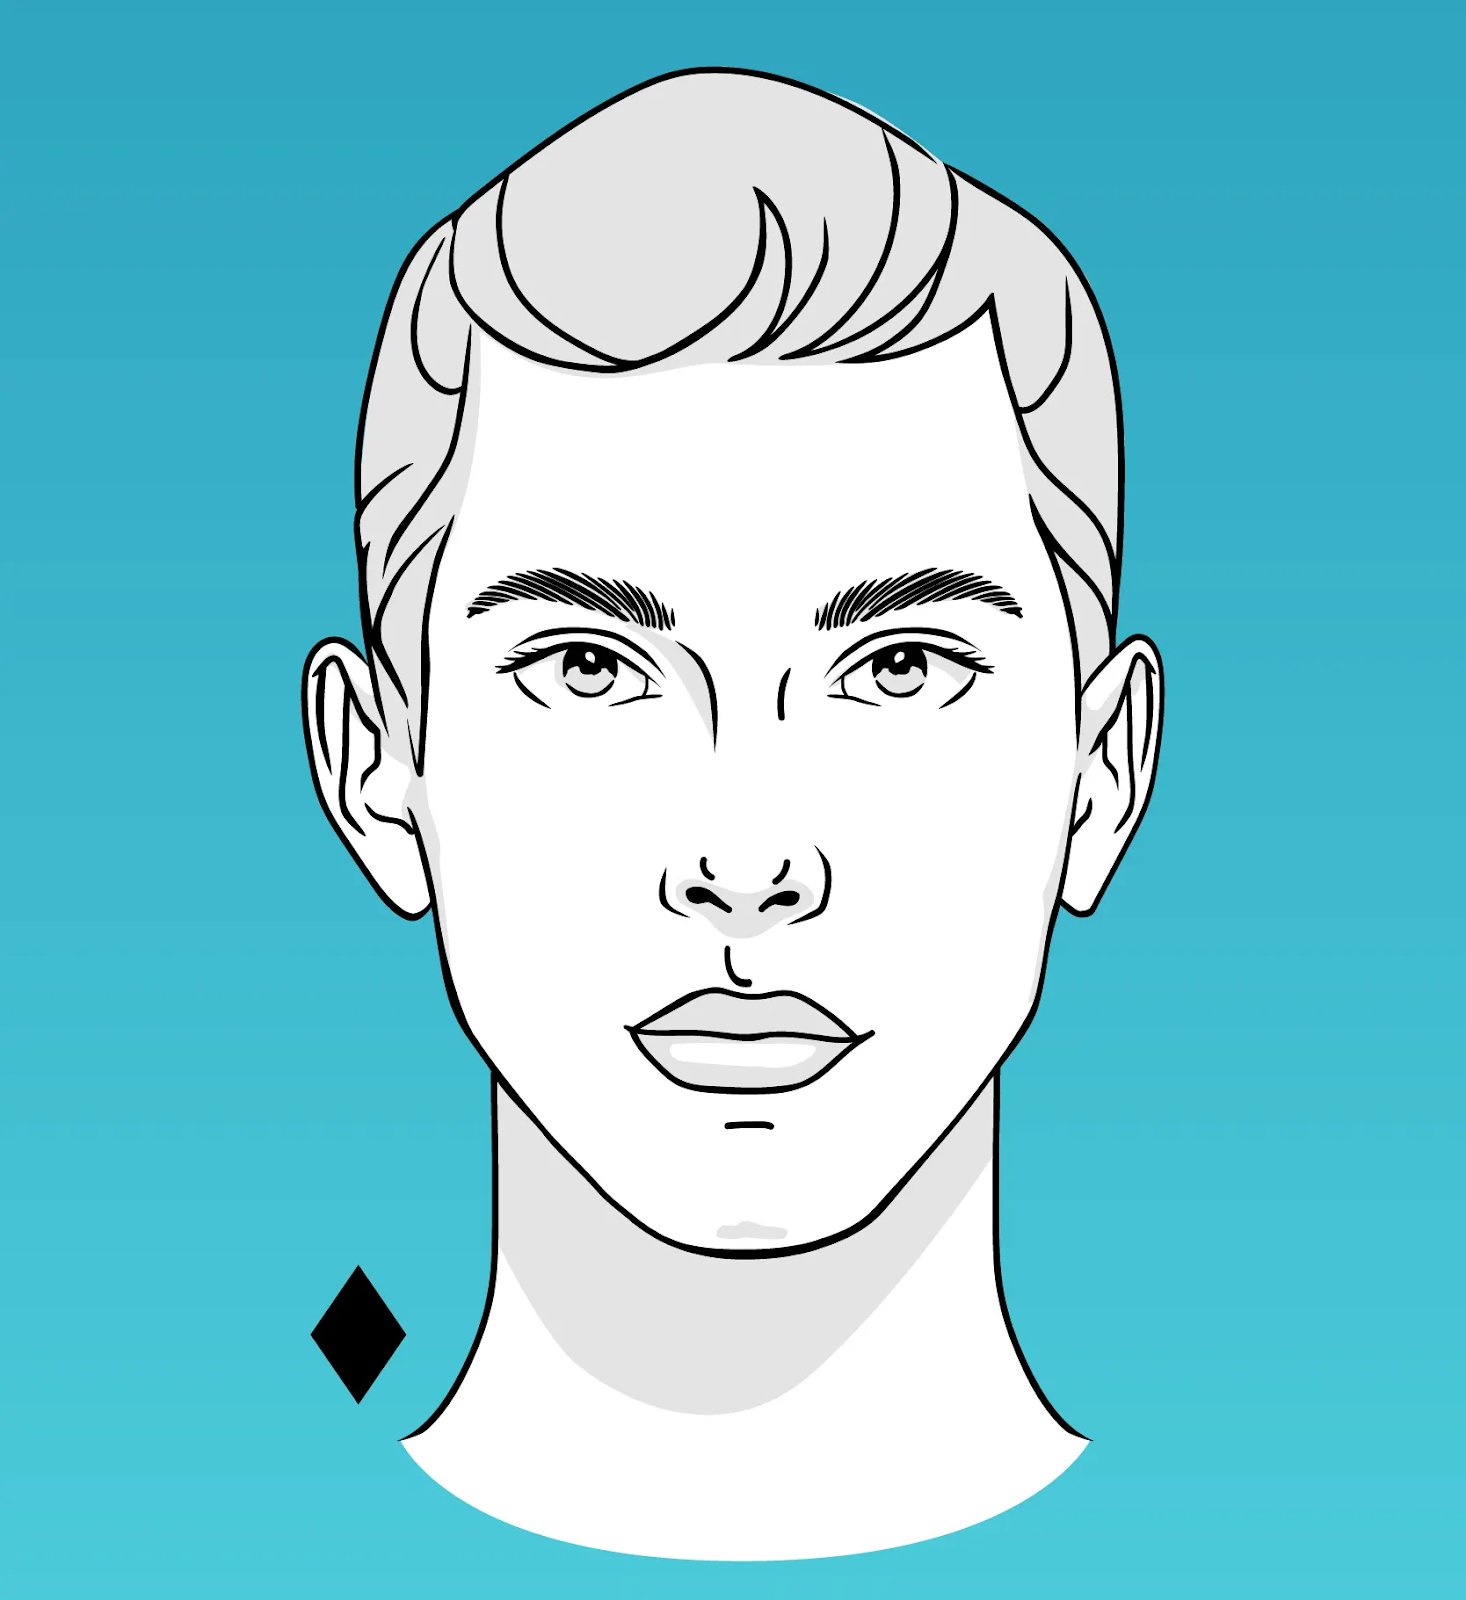 image depicting a diamond-shaped face